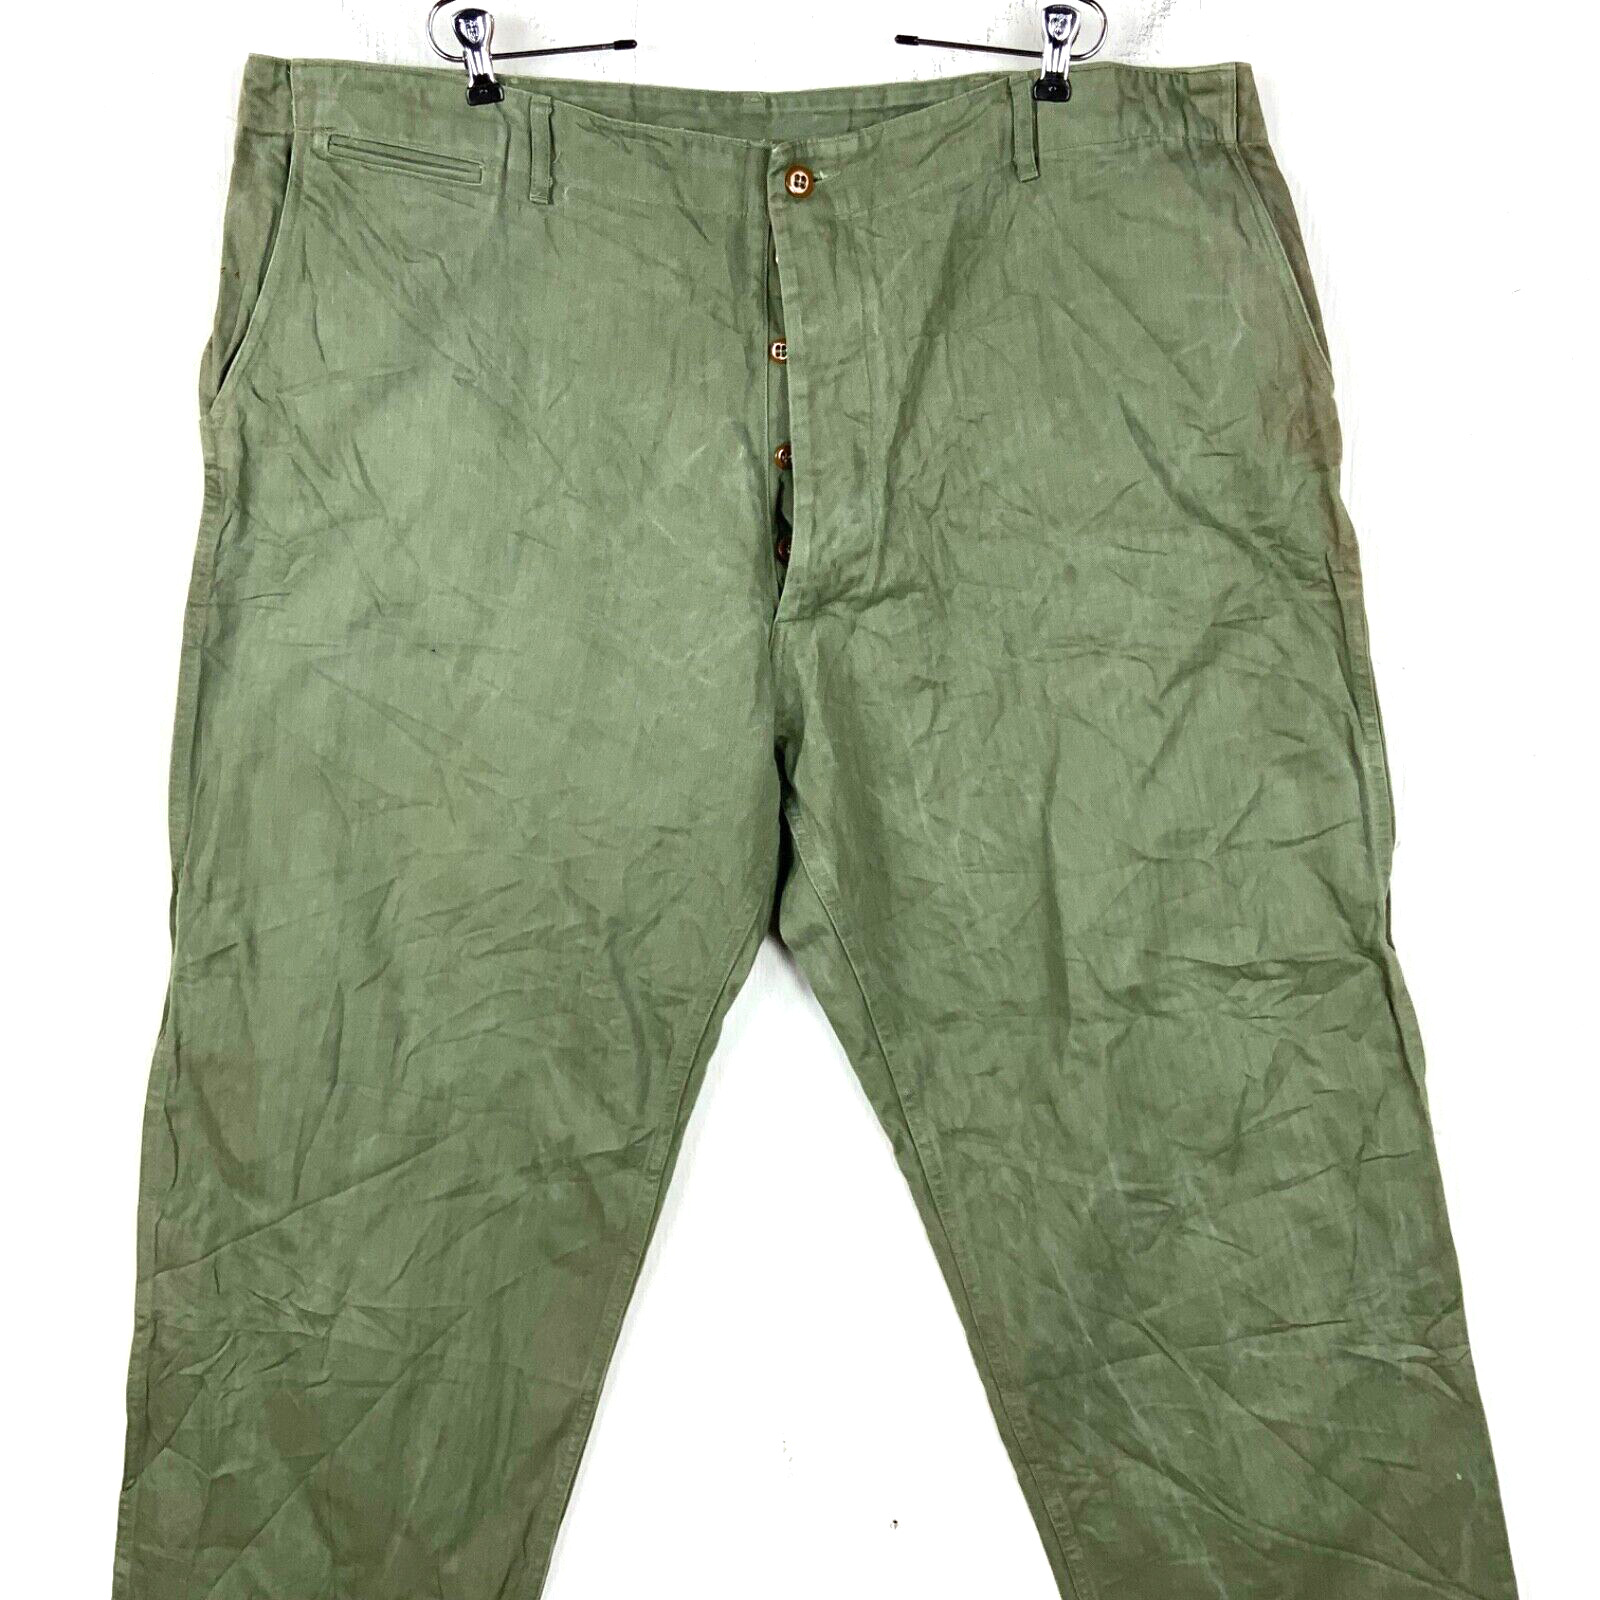 Vintage Us Military Hbt Trousers Size 47x28 Green 40s 50s